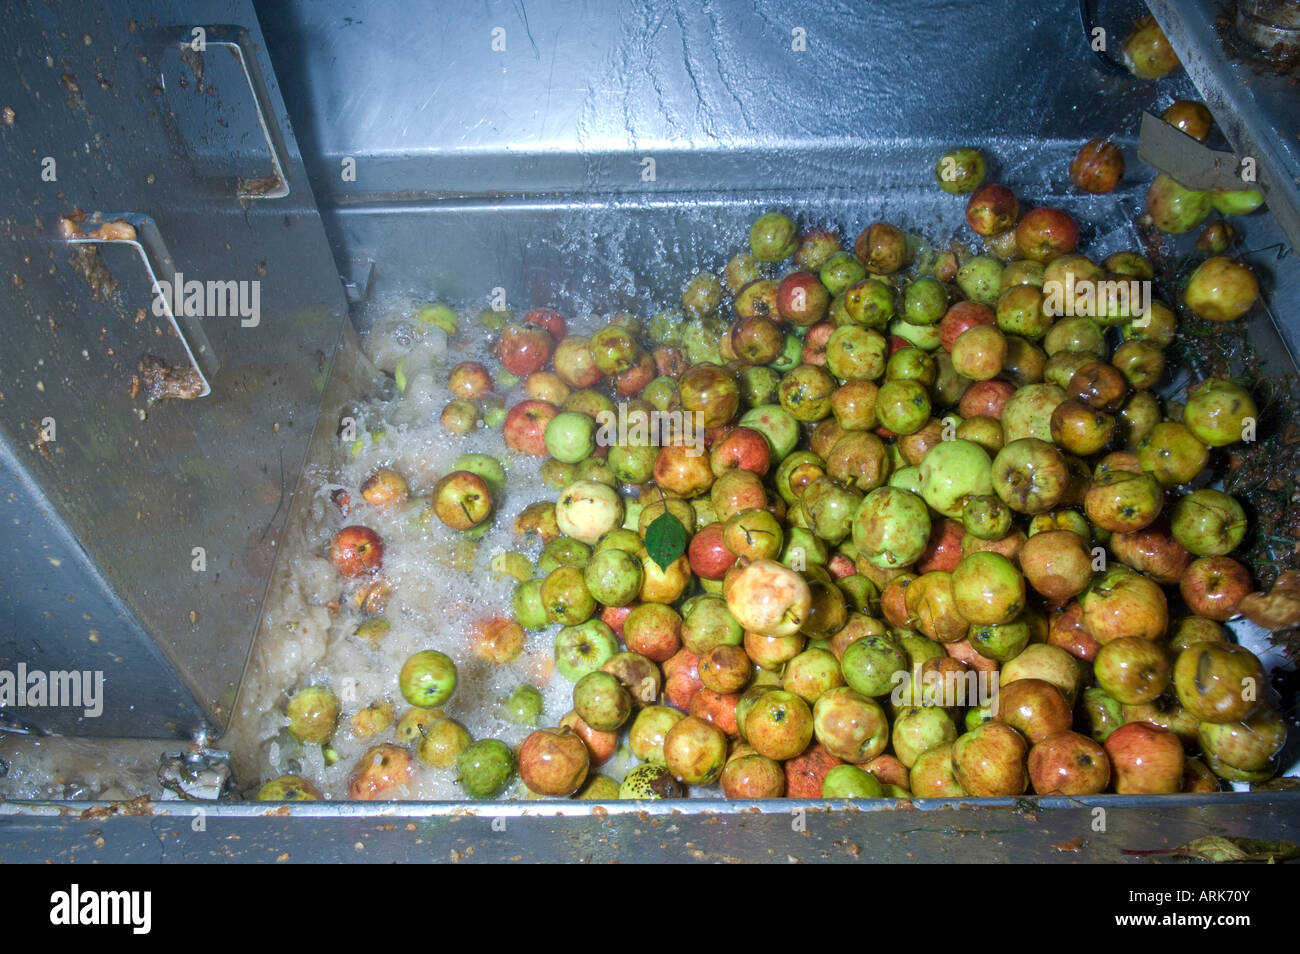 Cider Apples being washed and processed at Thatchers cider Sandford Somerset England Stock Photo